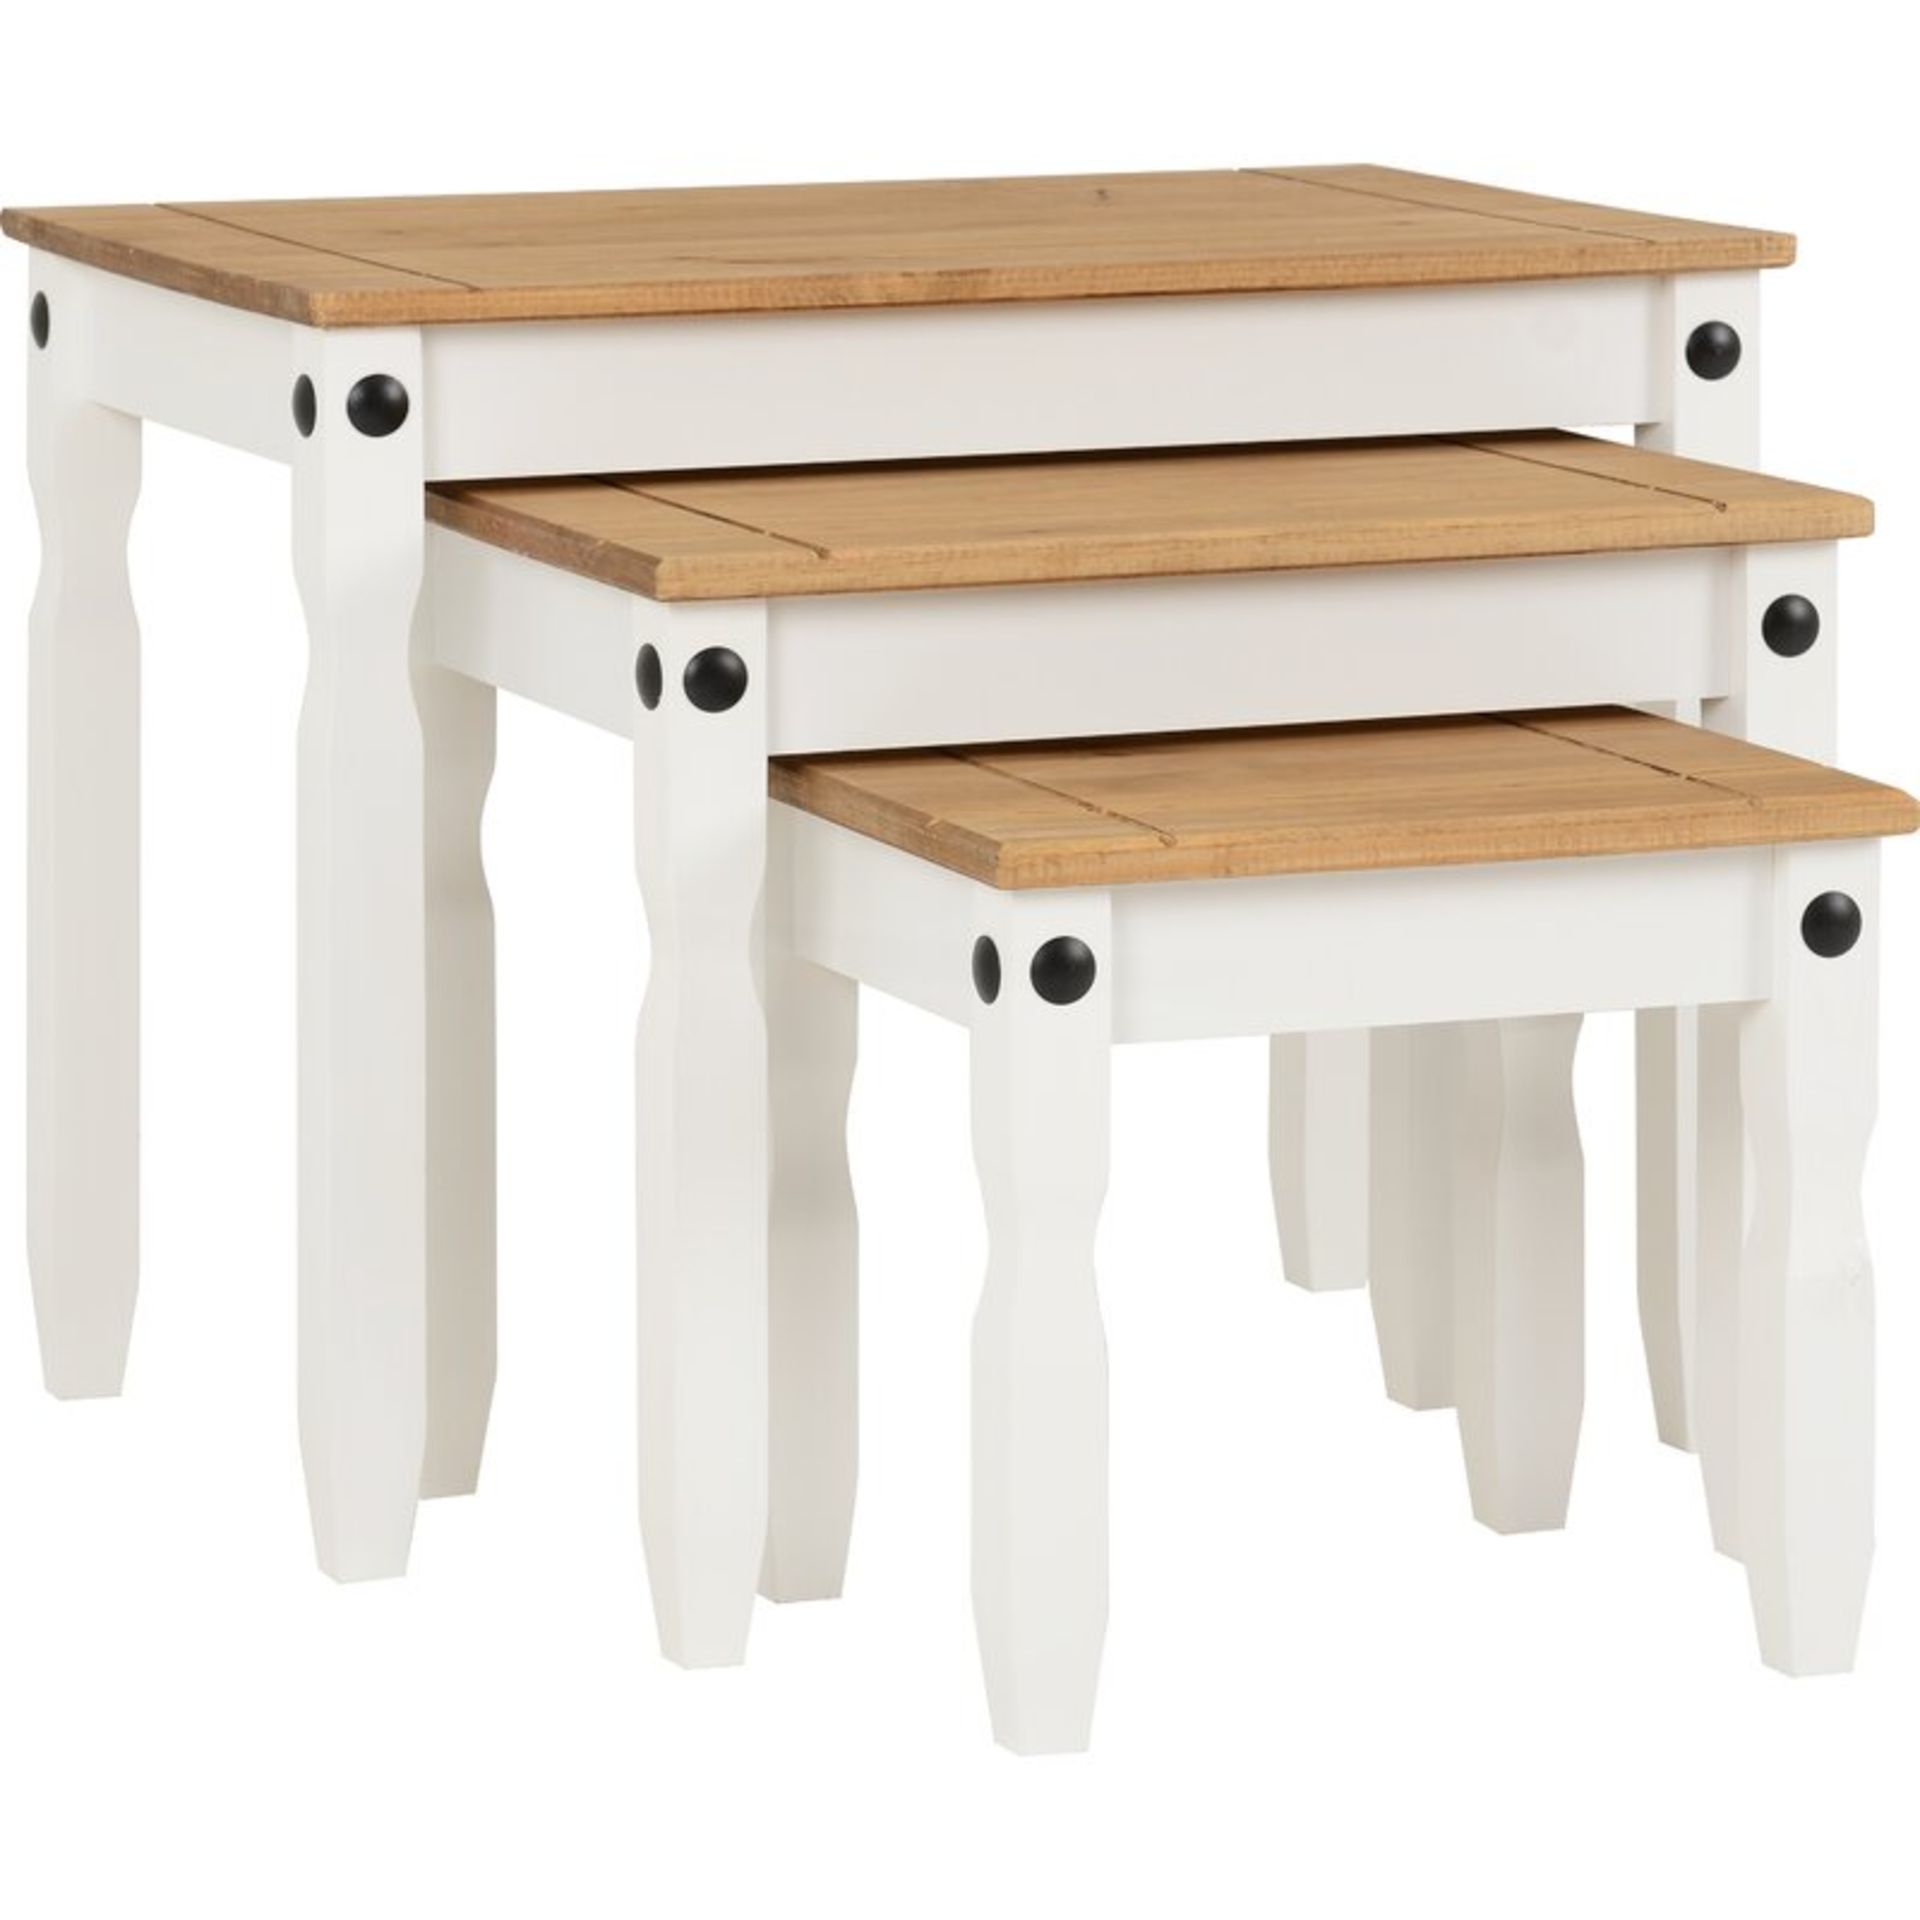 3 Piece Nest of Tables - RRP £68.99